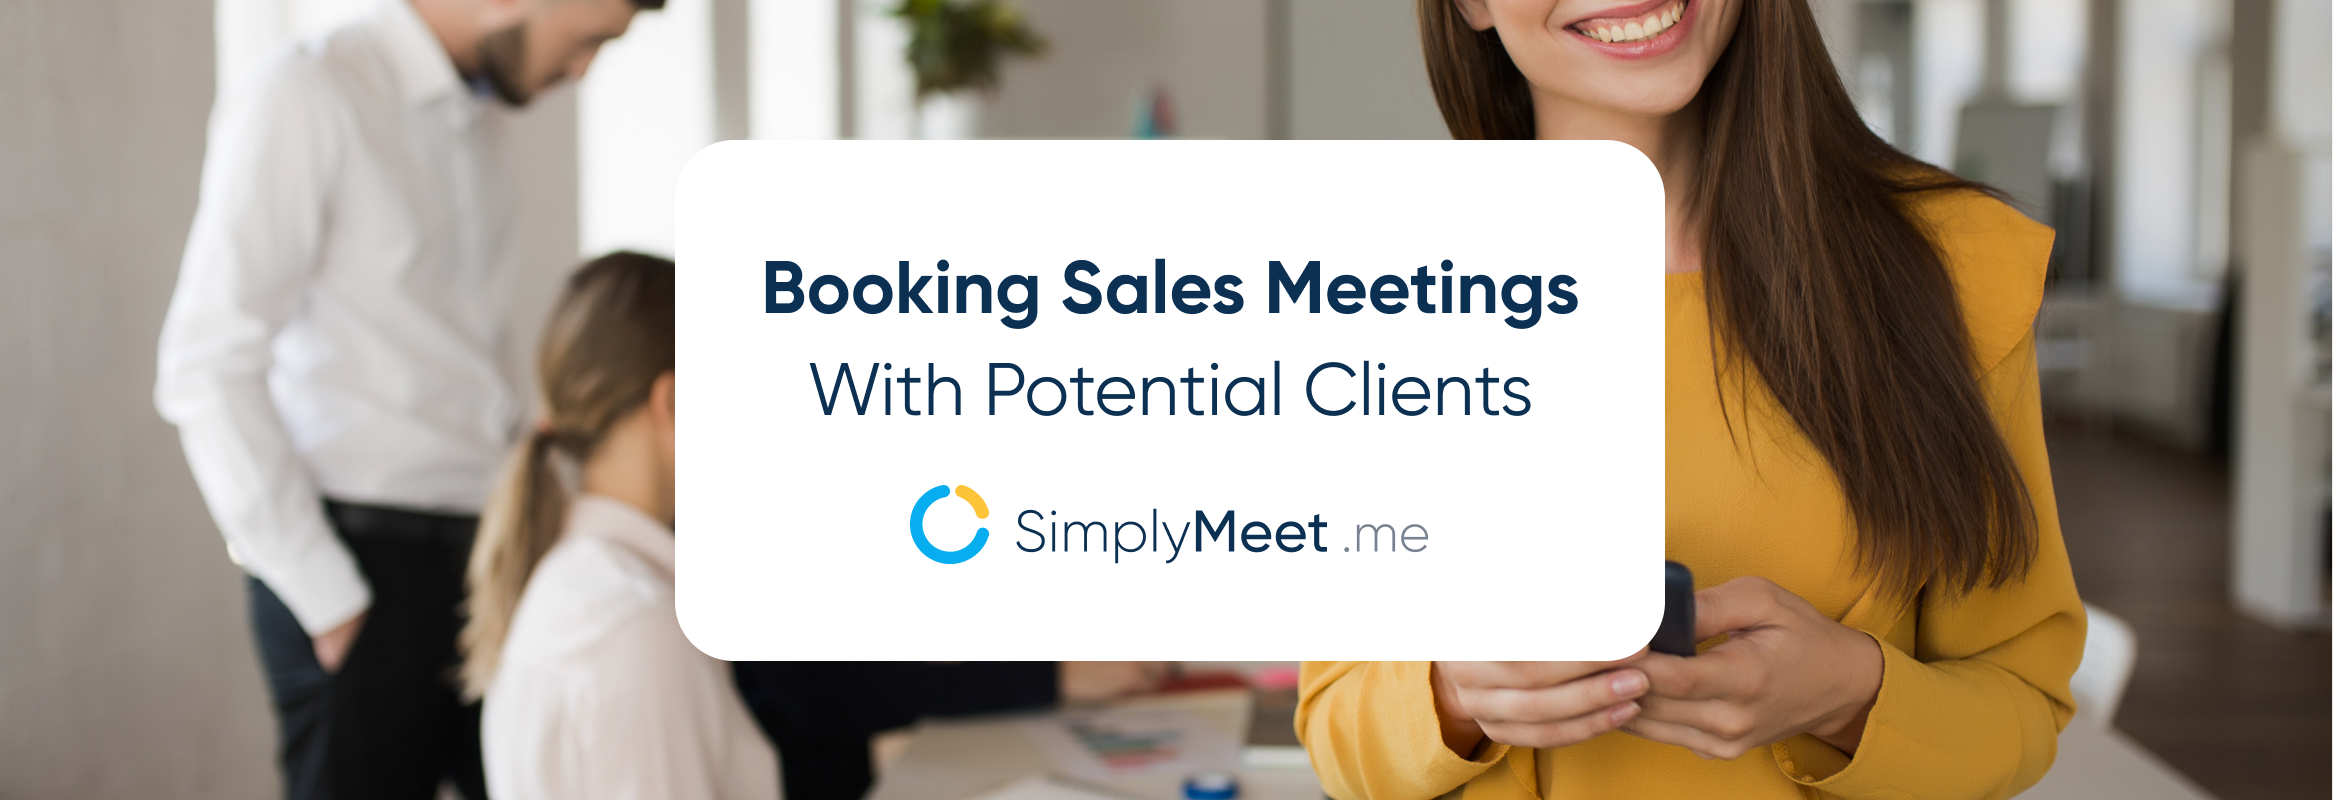 Booking sales meetings with potential clients